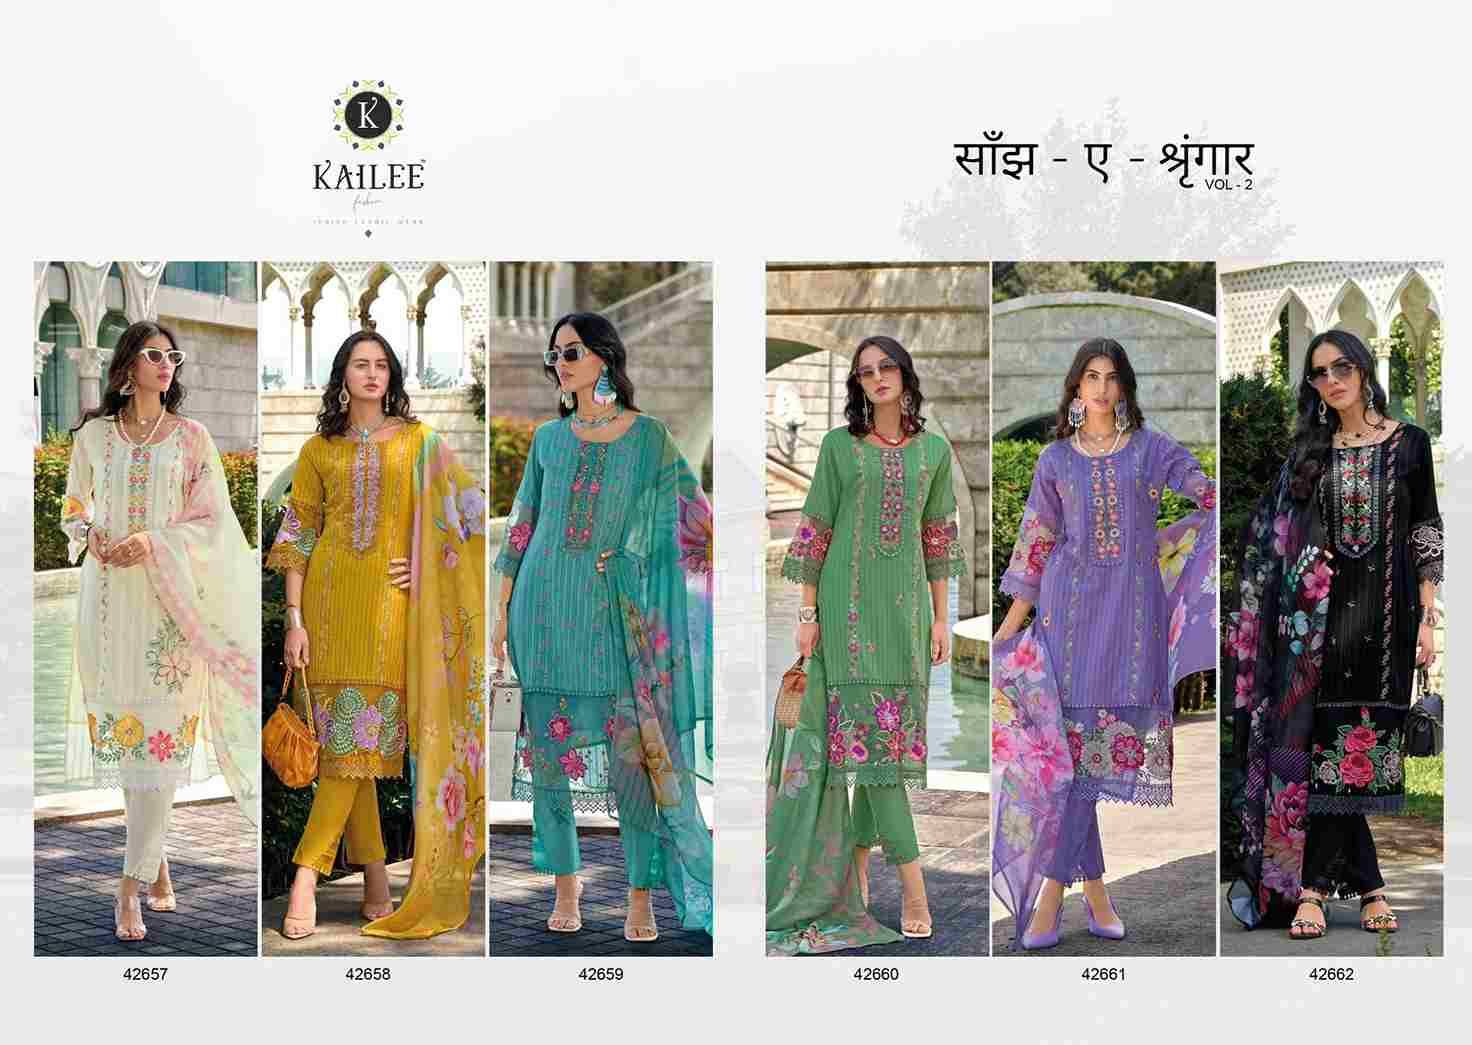 Sanj-E-Shrungar Vol-2 By Kailee 42657 To 42662 Series Beautiful Festive Suits Colorful Stylish Fancy Casual Wear & Ethnic Wear Pure Cotton Dresses At Wholesale Price